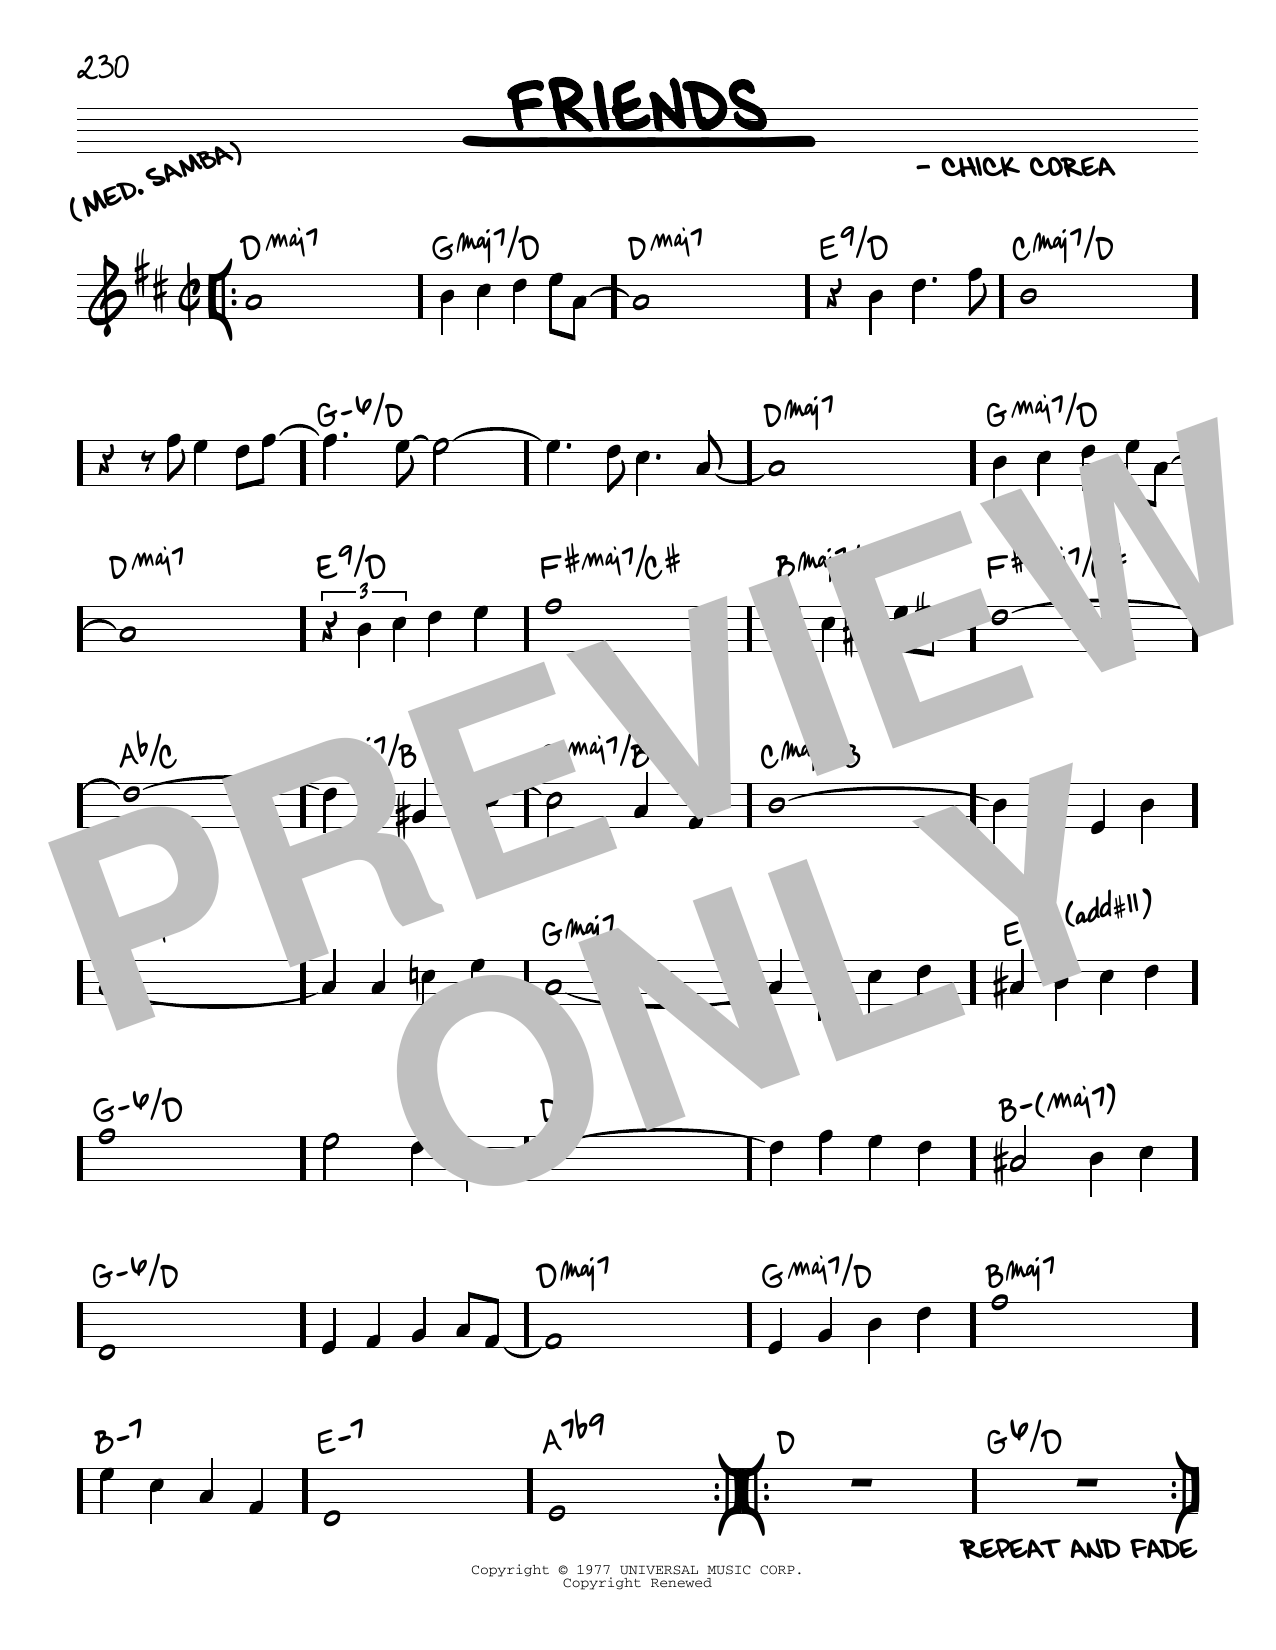 Download Chick Corea Friends sheet music and printable PDF score & Jazz music notes